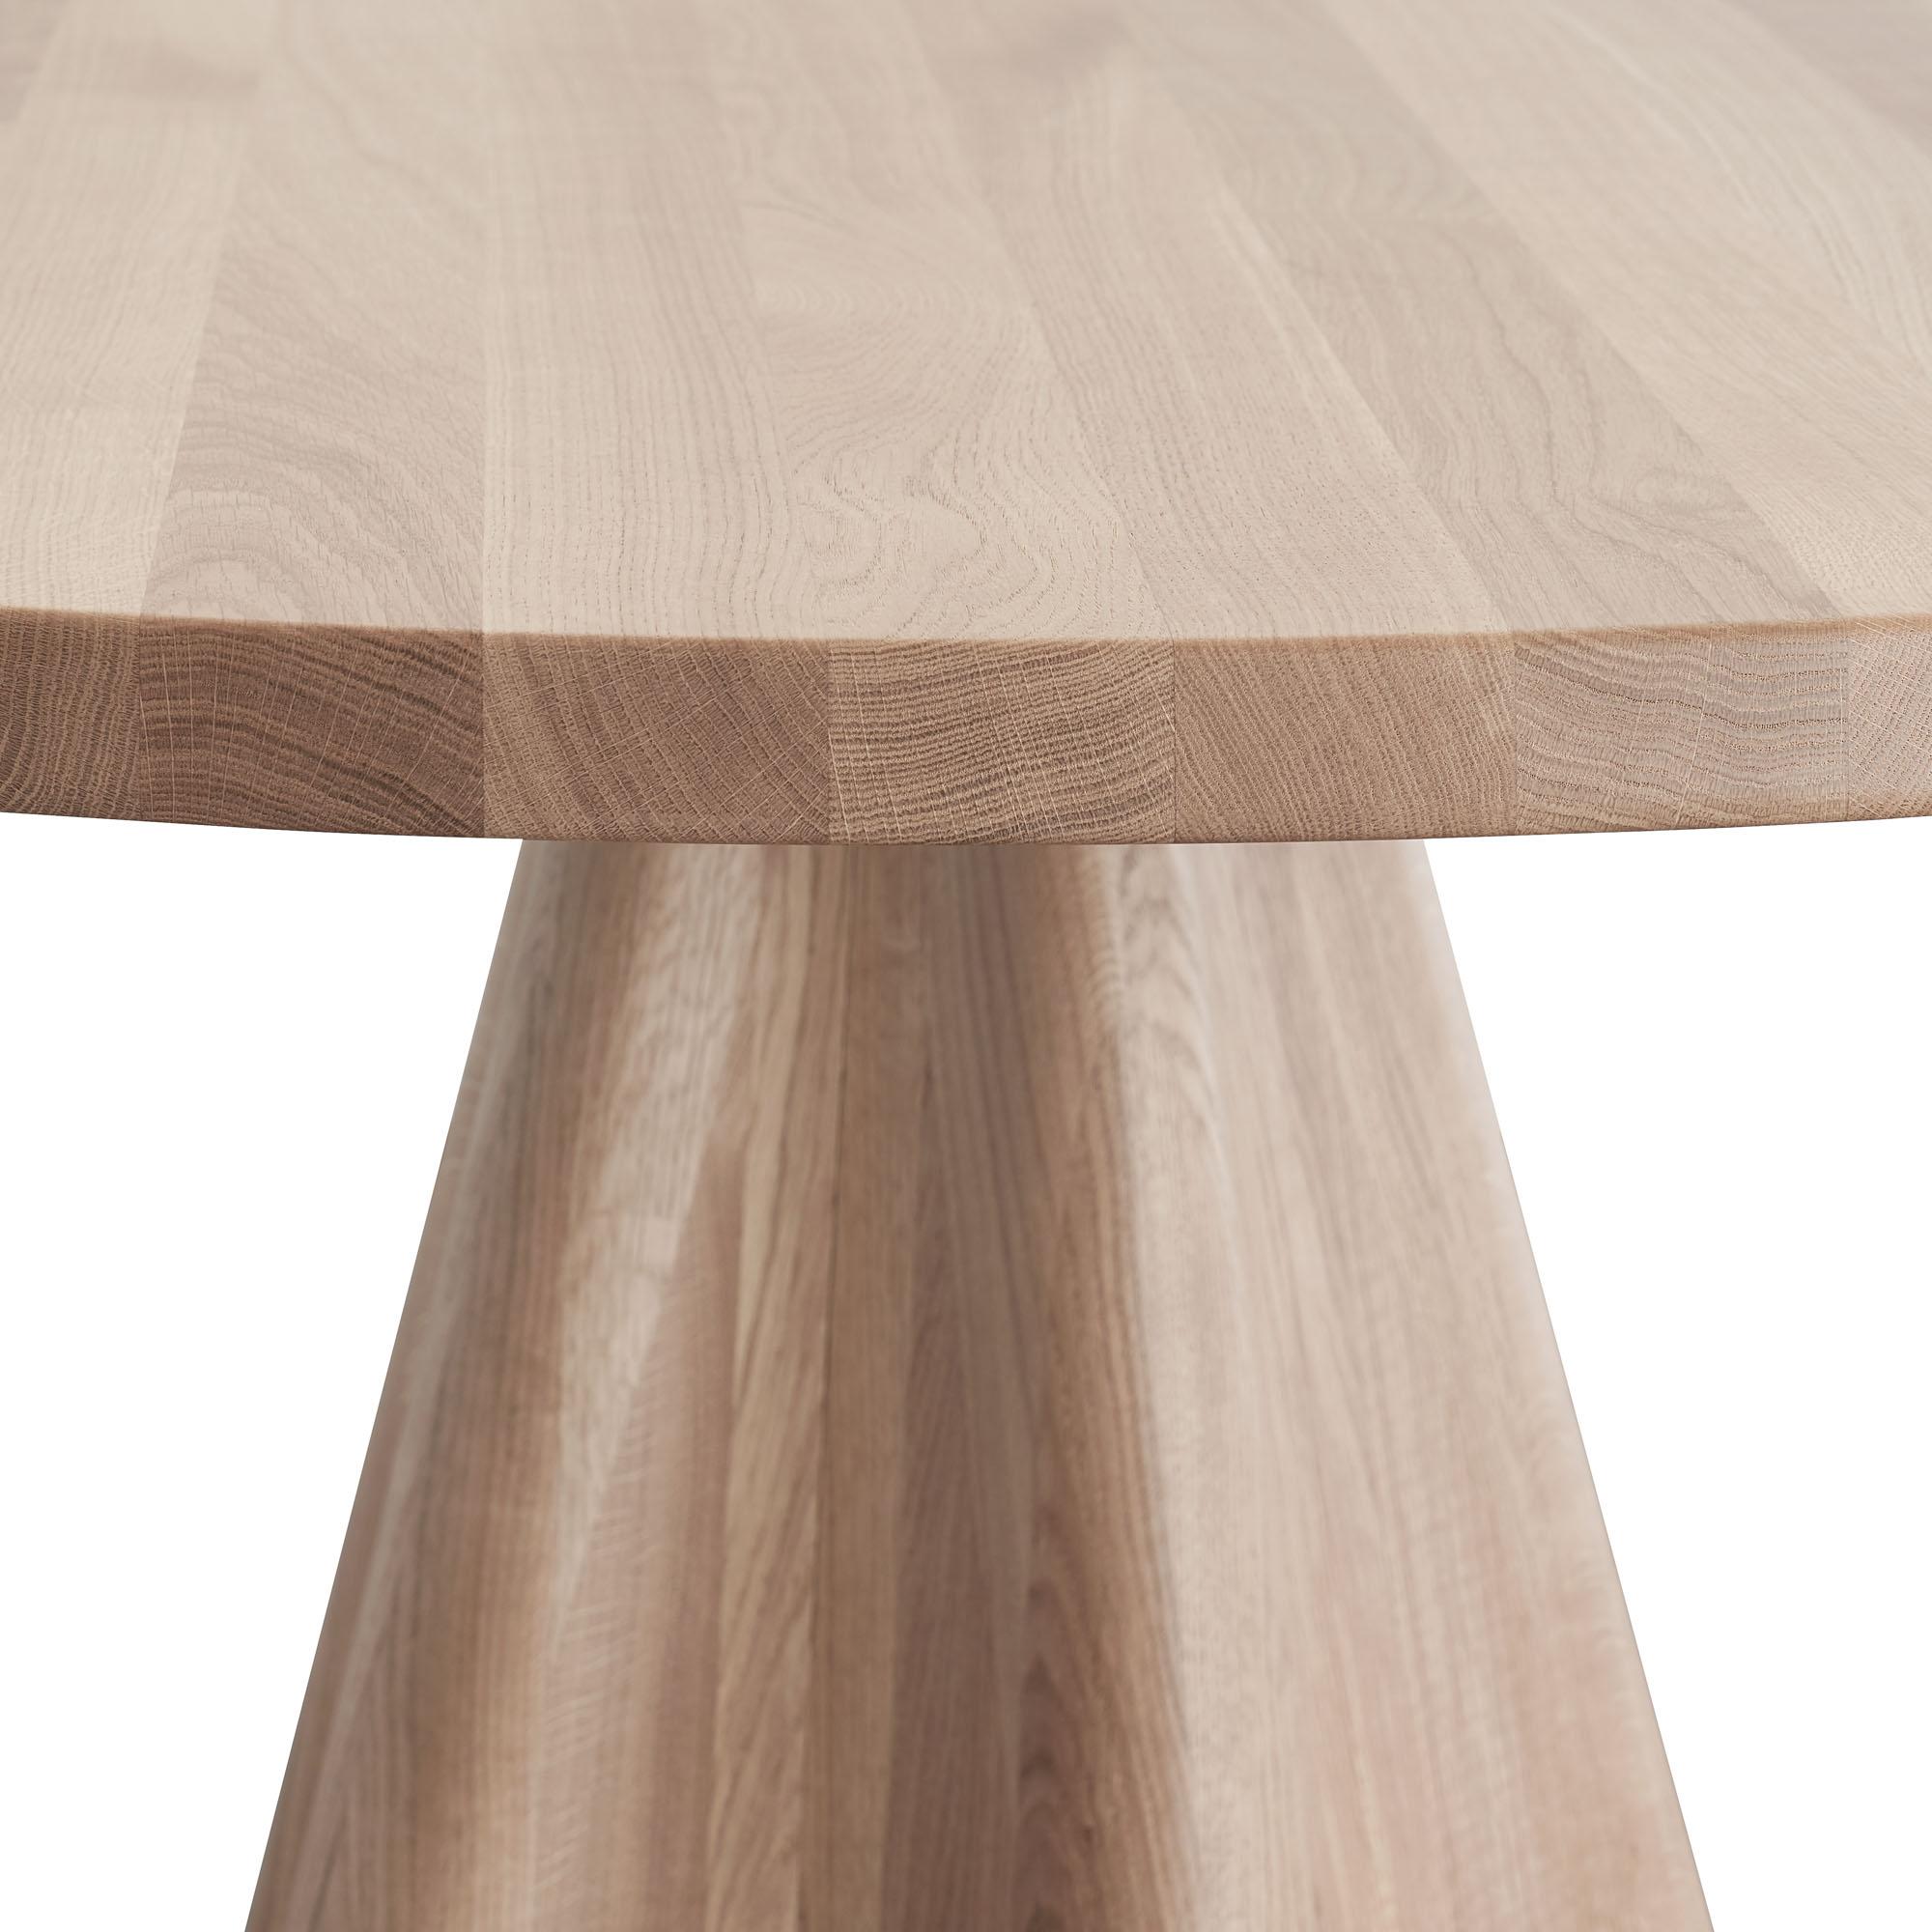 The Stella Dining Table has a sculptural presence that joins the flat planes of a round top with the curves of an undulating base in intriguing ways. Designed in Brooklyn by Syrette Lew of Moving Mountains and meticulously handcrafted in Italy, this